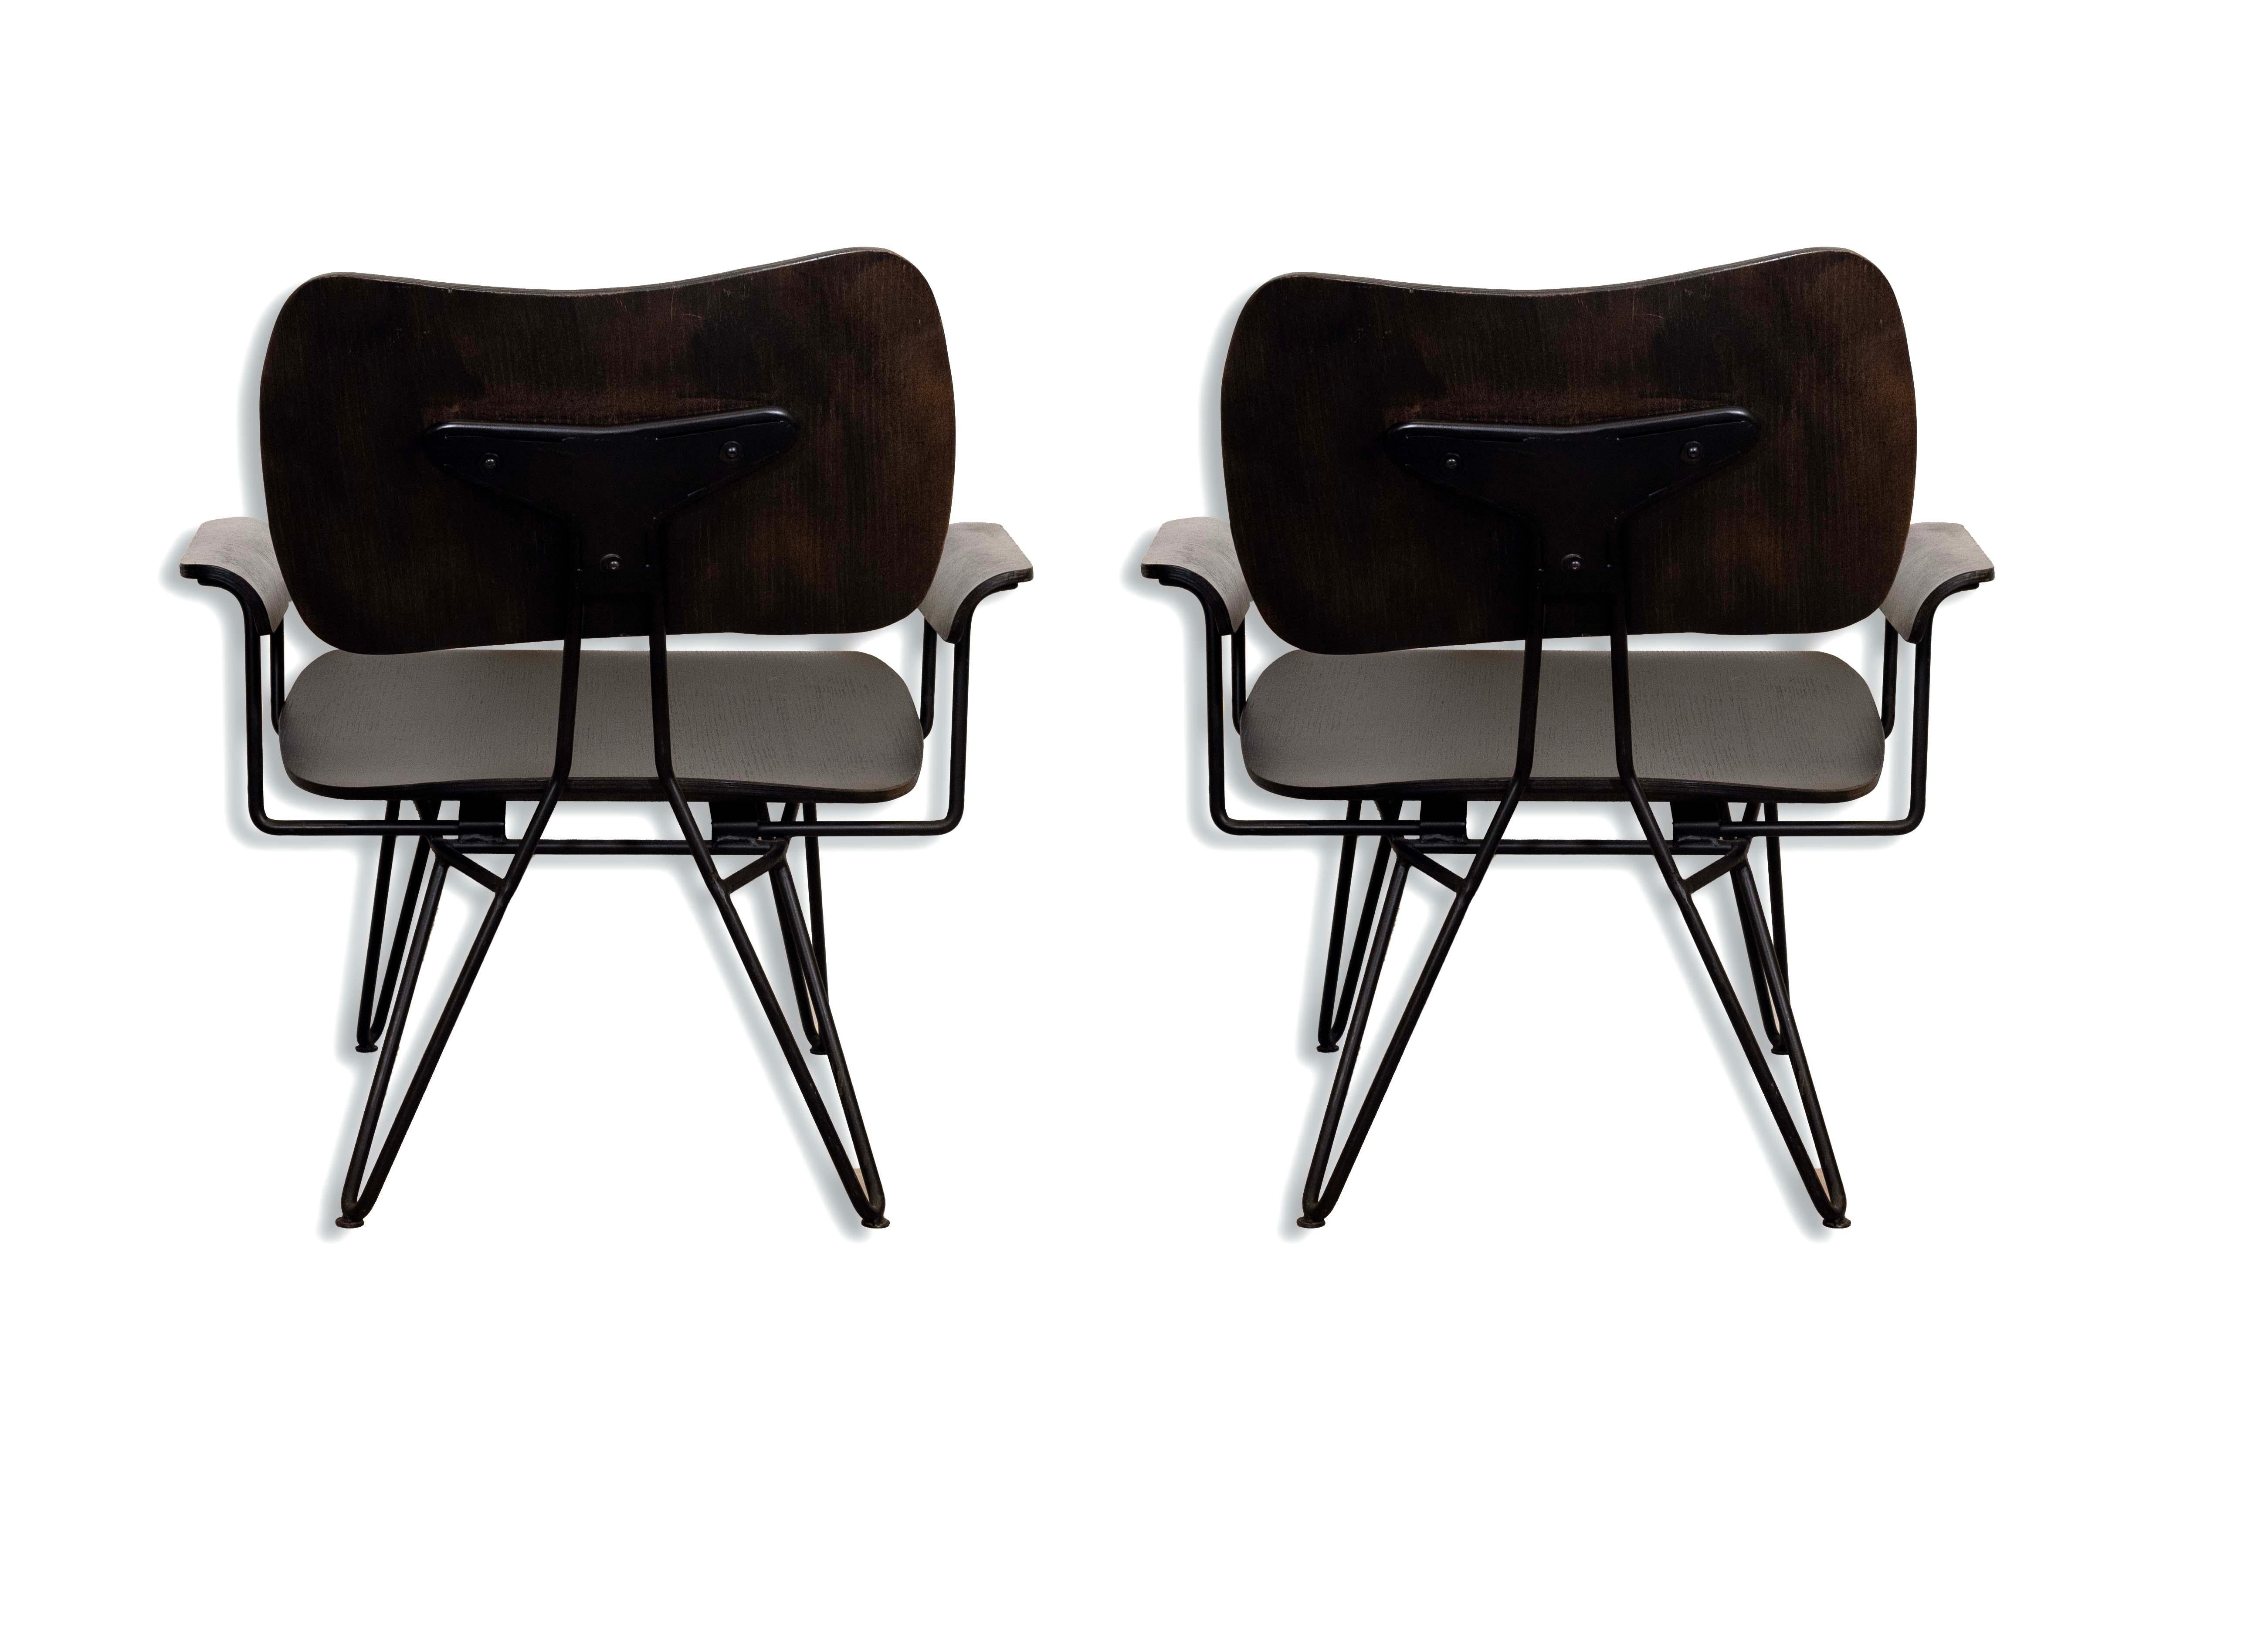 20th Century Contemporary Modern Pair of Overdyed Lounge Chairs by Diesel For Moroso For Sale